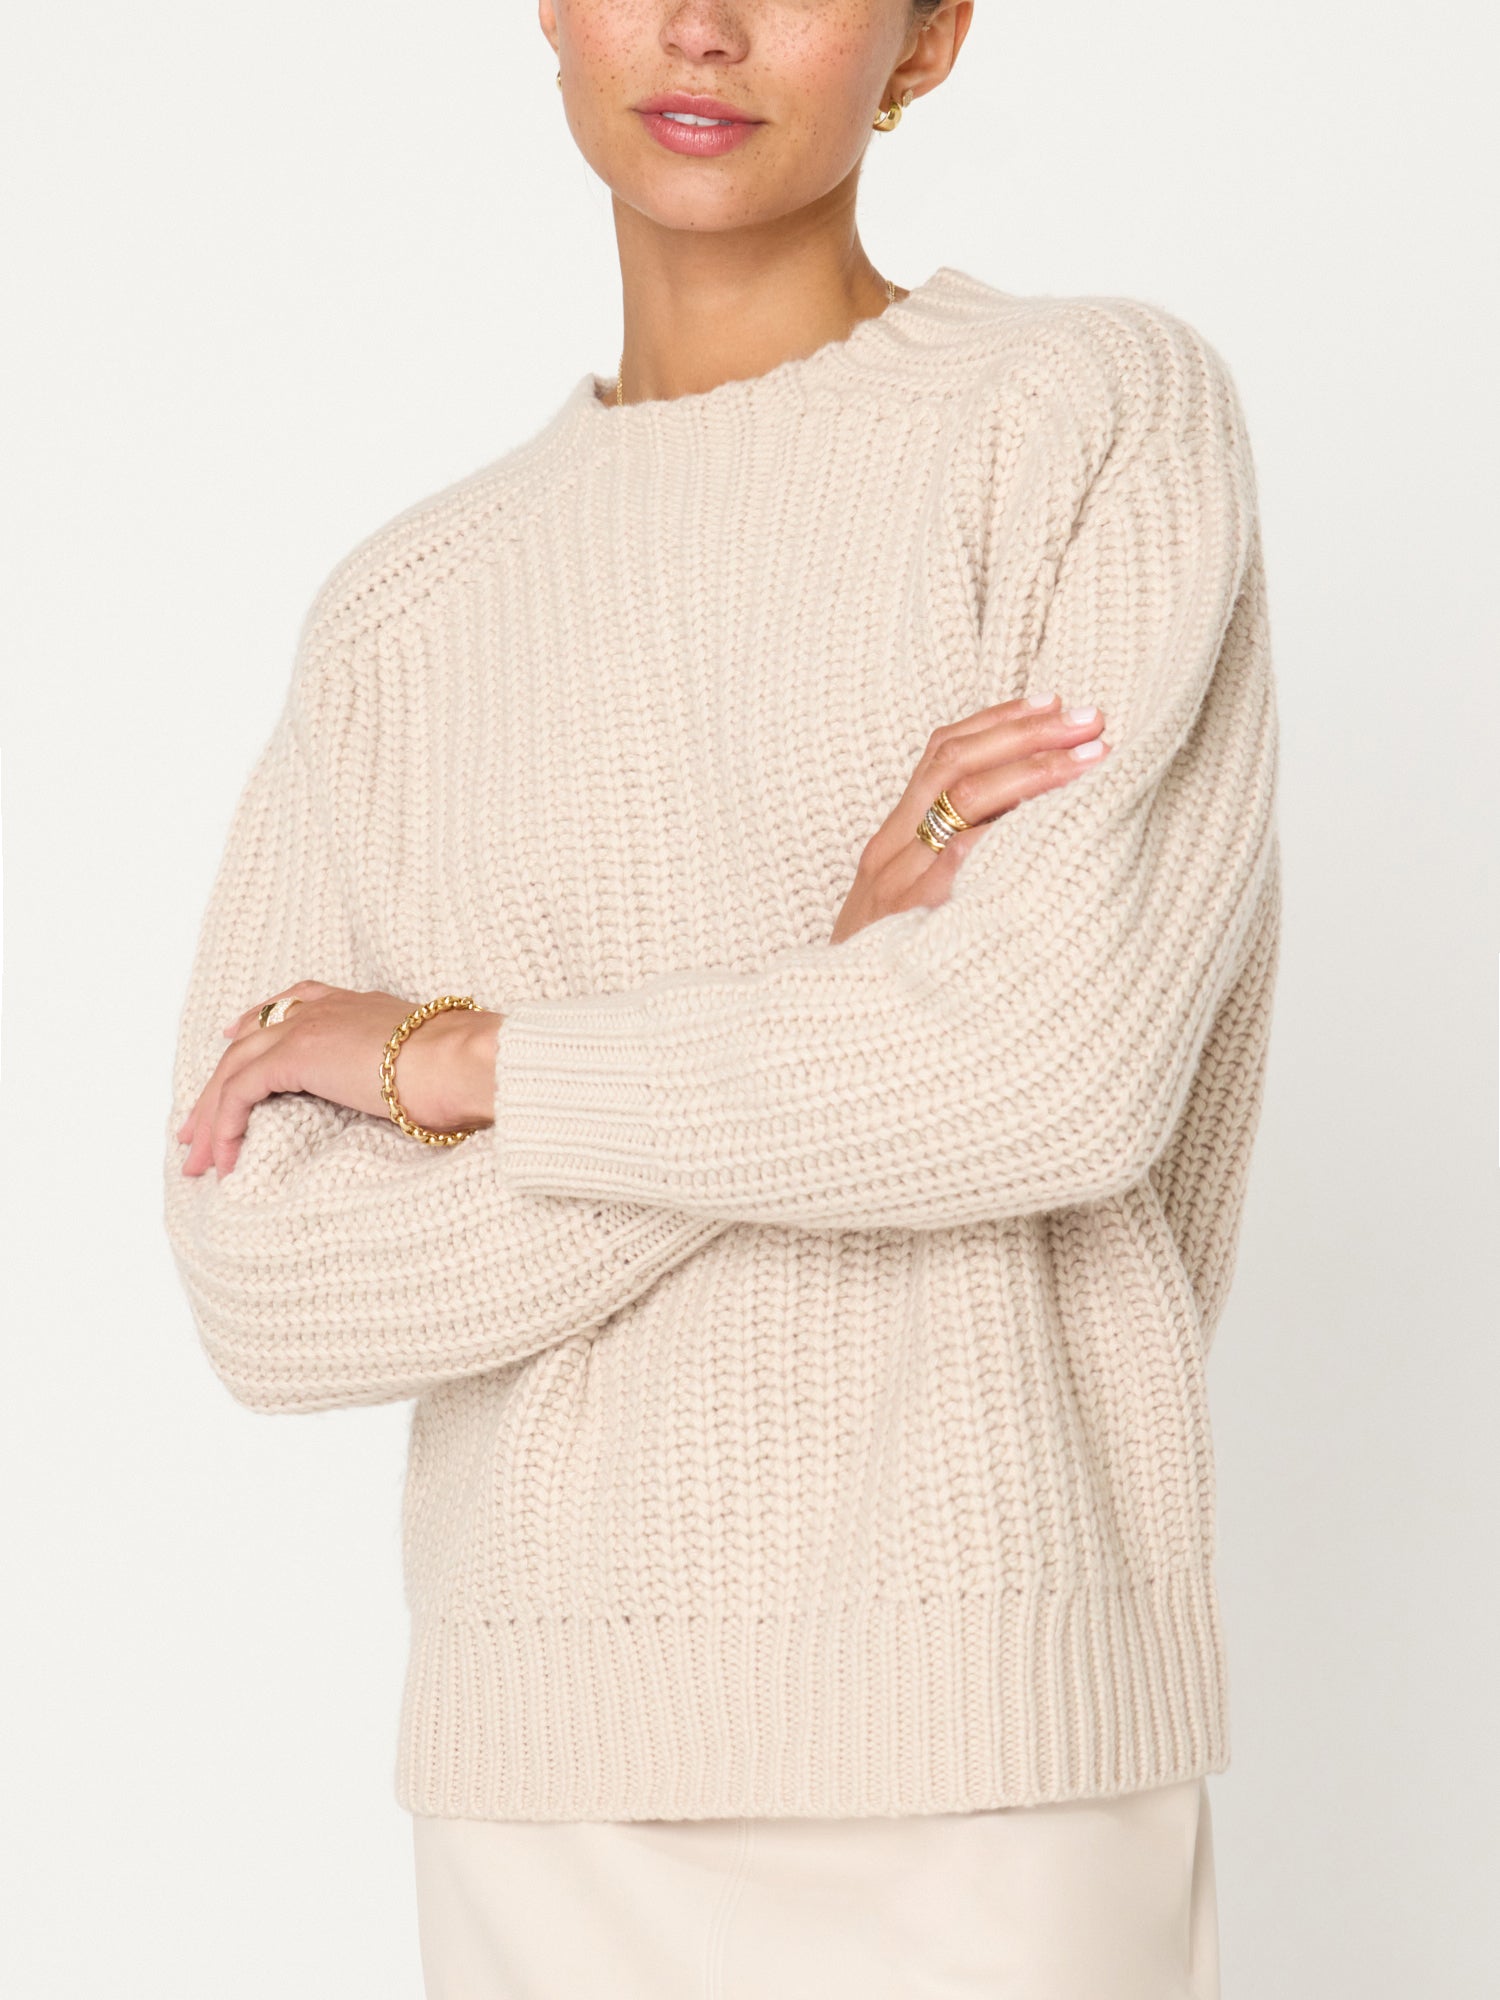 Beckett beige ribbed crewneck pullover sweater front view